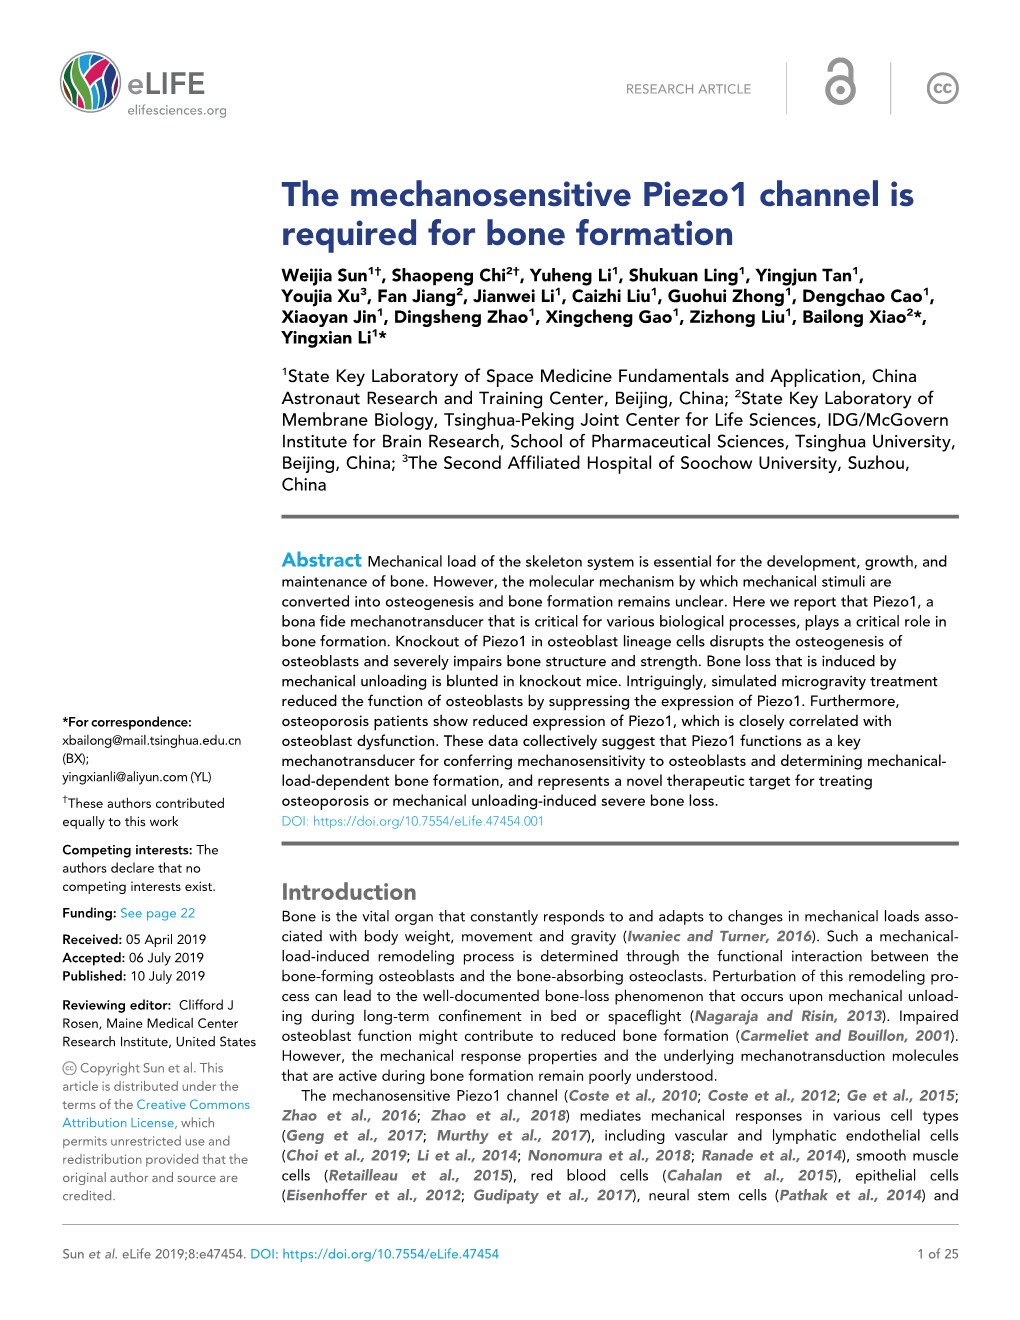 The Mechanosensitive Piezo1 Channel Is Required for Bone Formation